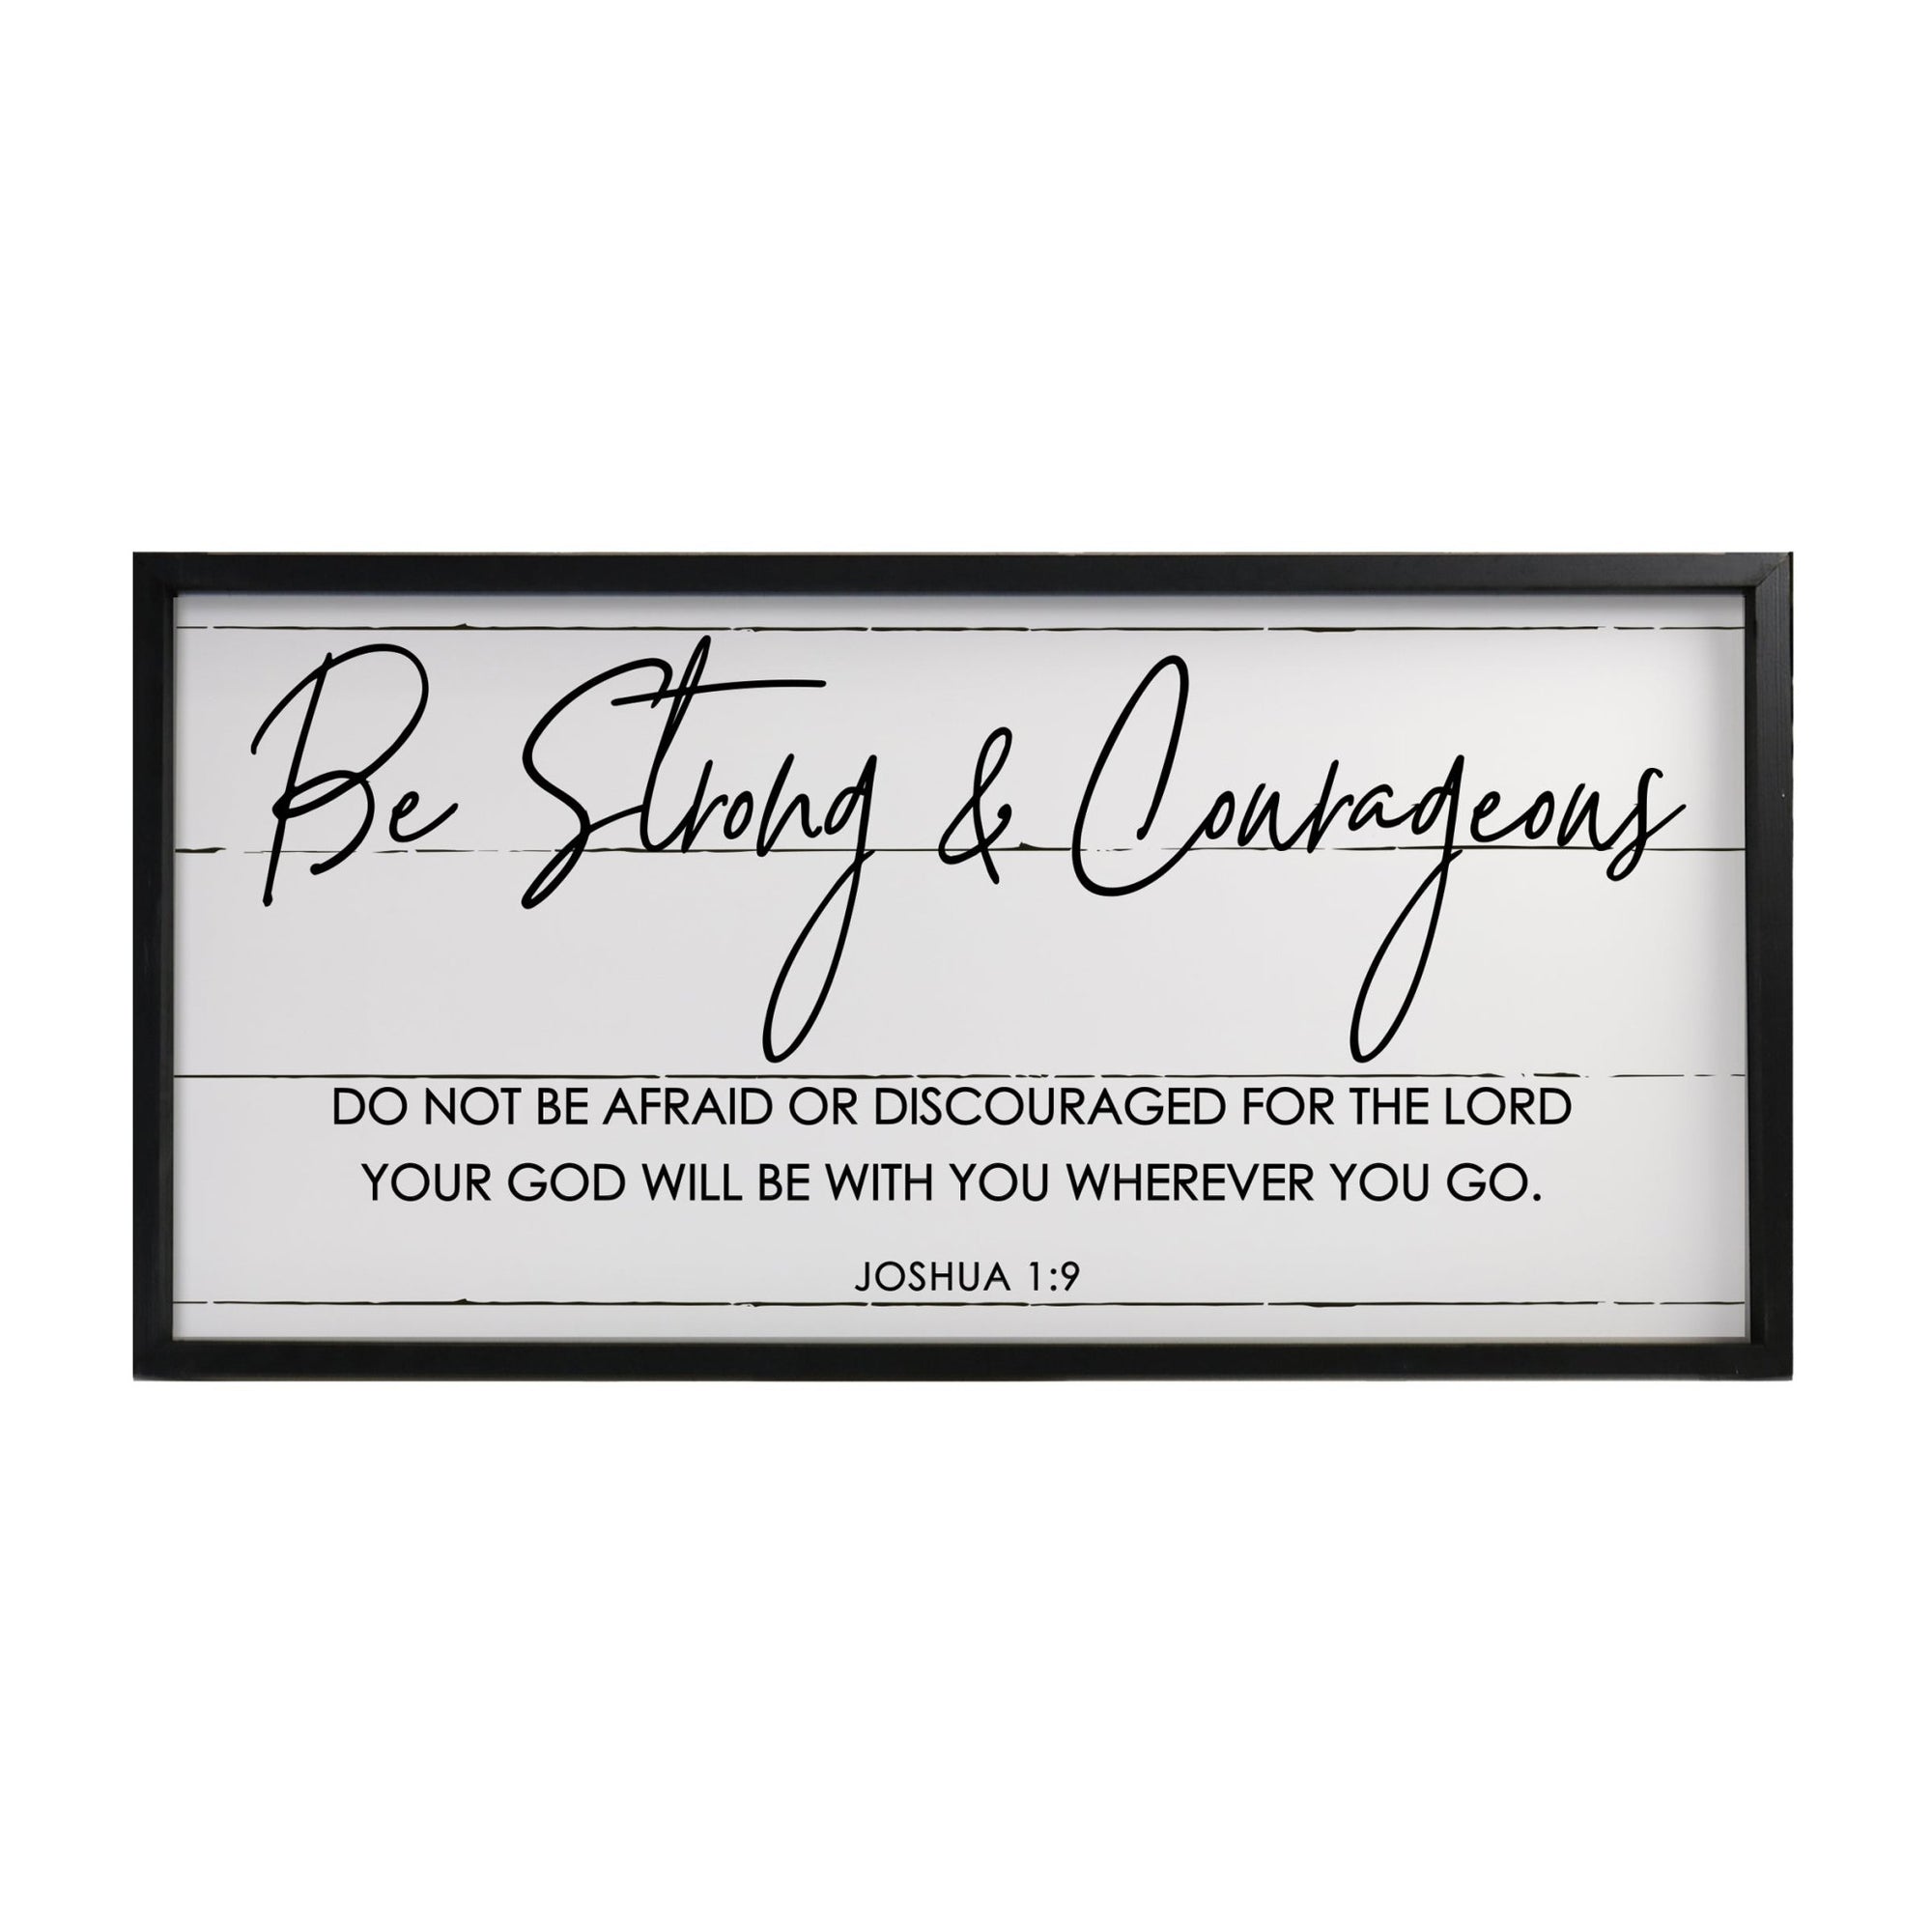 Large Family Wall Décor Quote Sign For Home Decoration 18 x 36 - Be Strong & Courageous - LifeSong Milestones